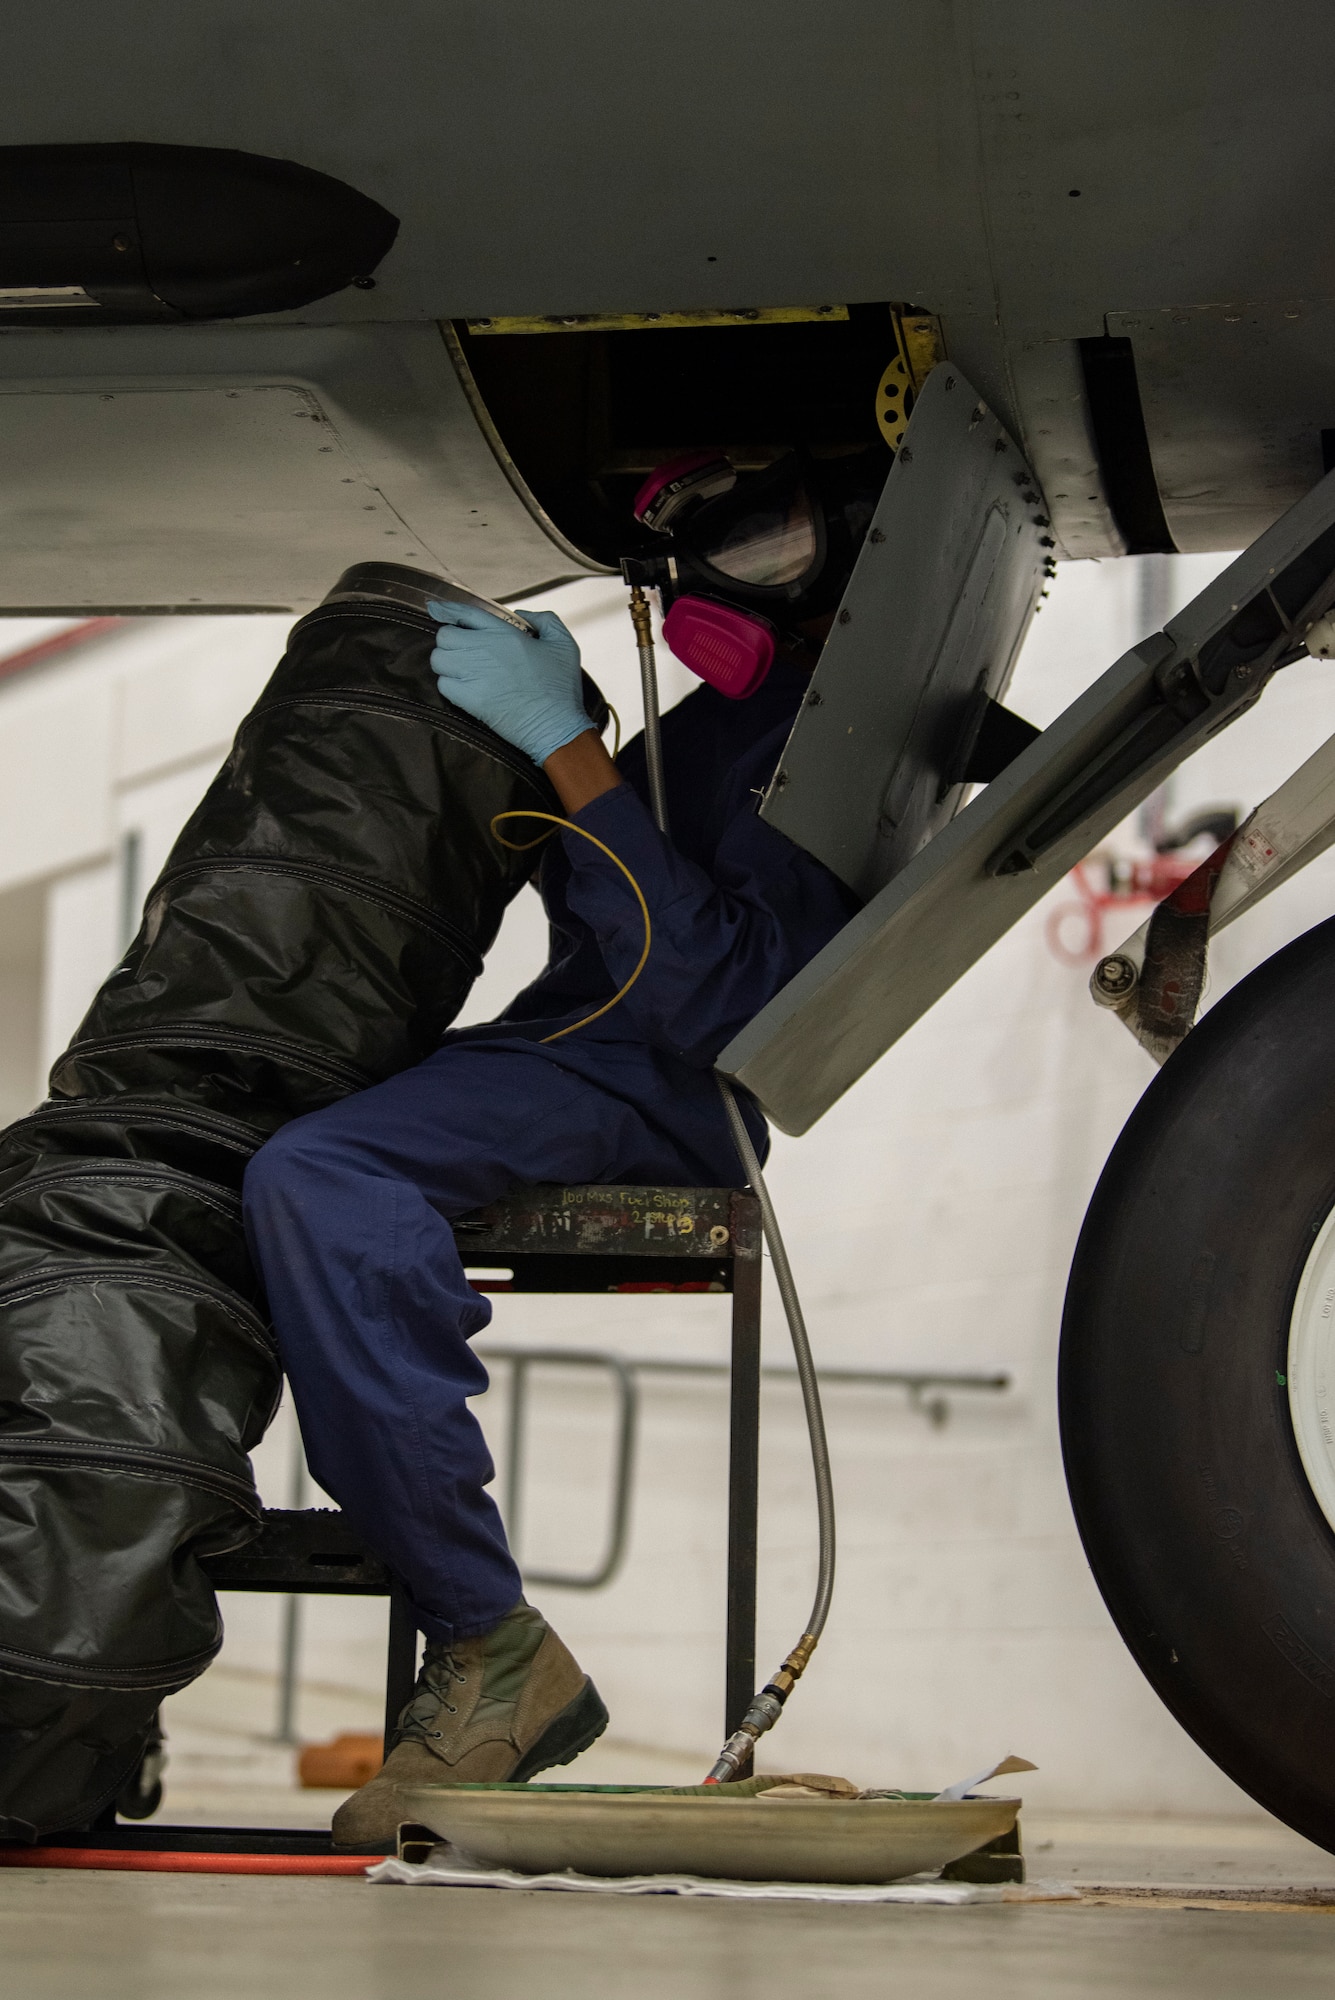 Airman 1st Class Dezmond Ross, 100th Maintenance Squadron fuel systems repair apprentice, brings an air duct to the opening of a KC-135 Stratotanker at RAF Mildenhall, England, May 27, 2020. The air duct pushes fresh air into the interior fuel cells to provide ventilation and decrease the concentration of fuel vapor. (U.S. Air Force photo by Airman 1st Class Joseph Barron)